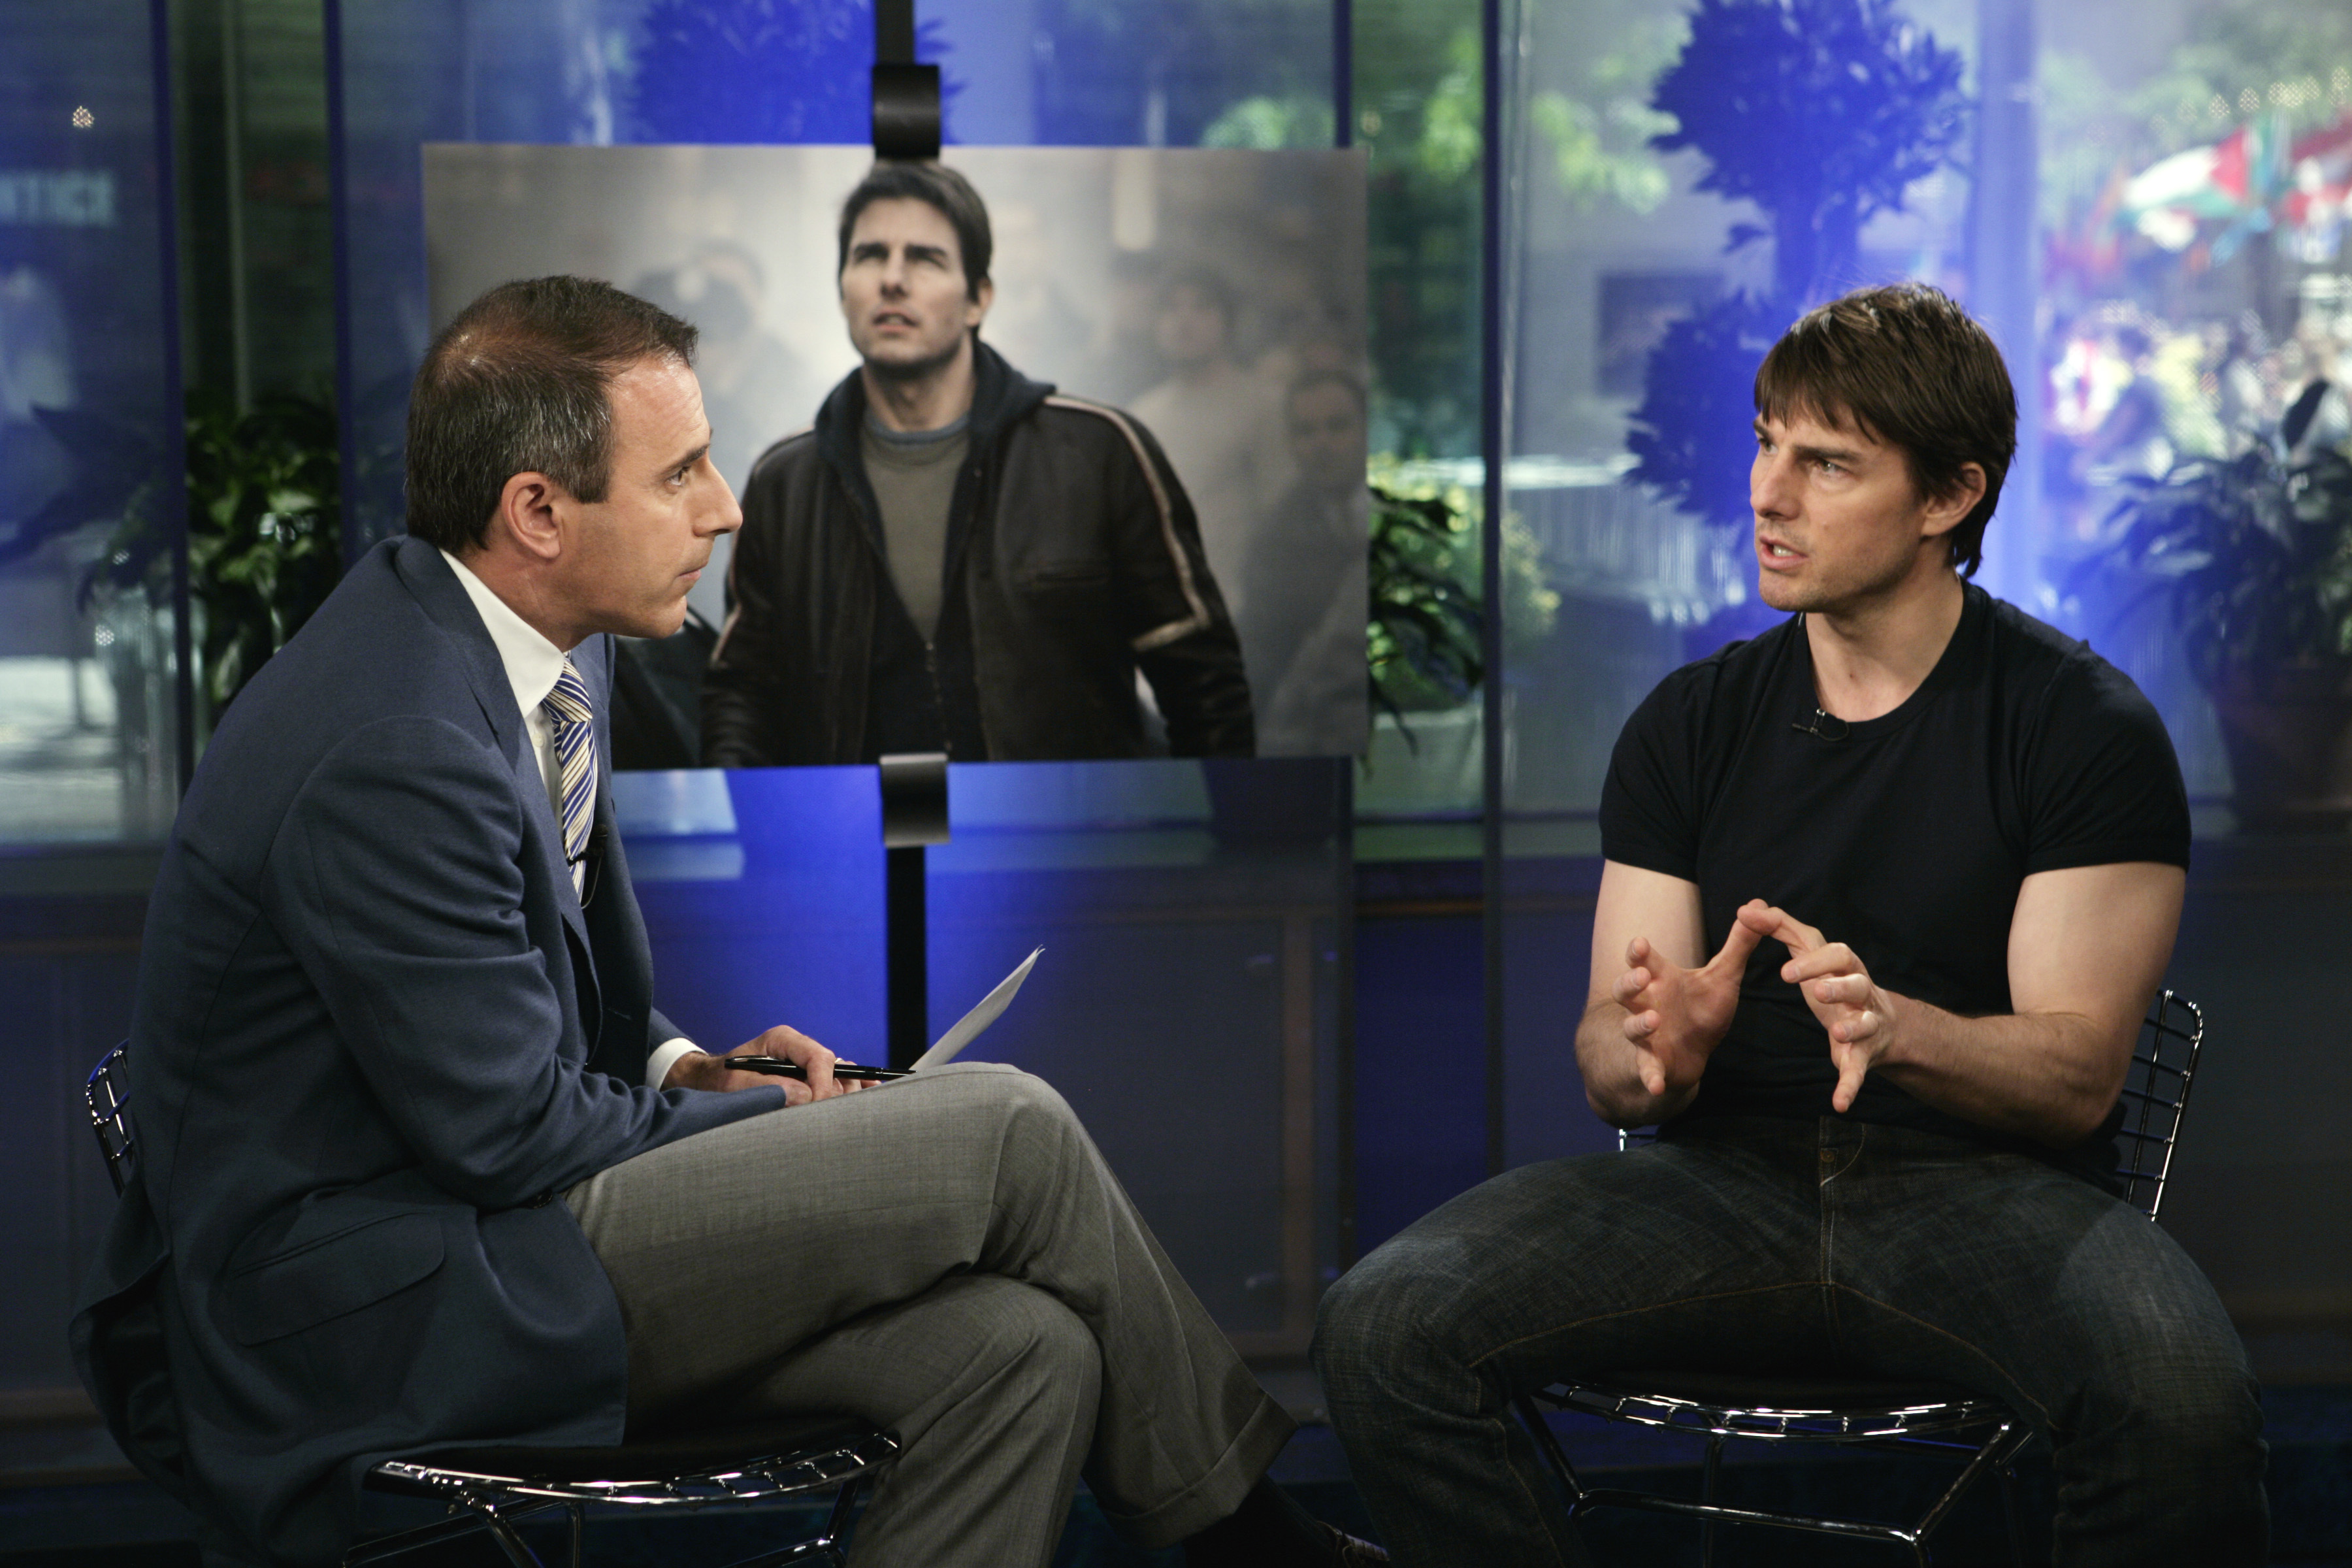 <p>That same month, June 2005, Tom Cruise stirred up controversy during an interview with Matt Lauer on the "Today" show. During the heated discussion, the A-list actor addressed Scientology and his issues with psychiatry, which he called "pseudoscience." The conversation was prompted by Tom's public criticism of Brooke Shields' endorsement of antidepressants, which she'd written about in her book "Down Came the Rain: My Journey Through Postpartum Depression."</p>